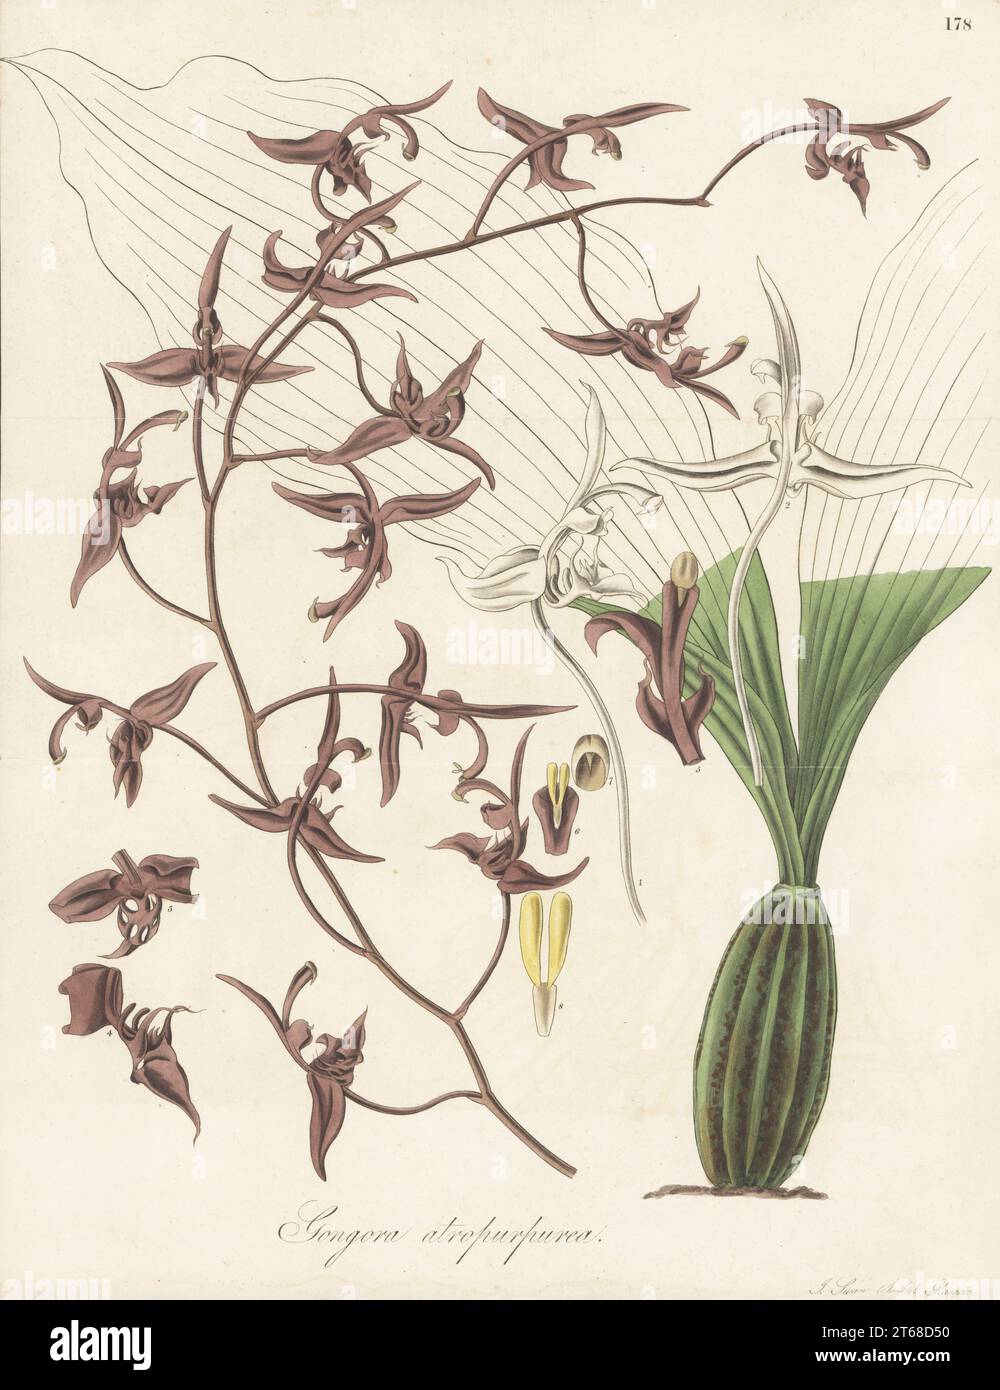 Dark-flowered gongora orchid, Gongora atropurpurea. Trinidad and Tobago to South tropical America, sent from Trinidad by Eduard Freiherr von Schack, Baron de Schack. Handcoloured copperplate engraving by Joseph Swan after a botanical illustration by William Jackson Hooker from his Exotic Flora, William Blackwood, Edinburgh, 1827. Stock Photo